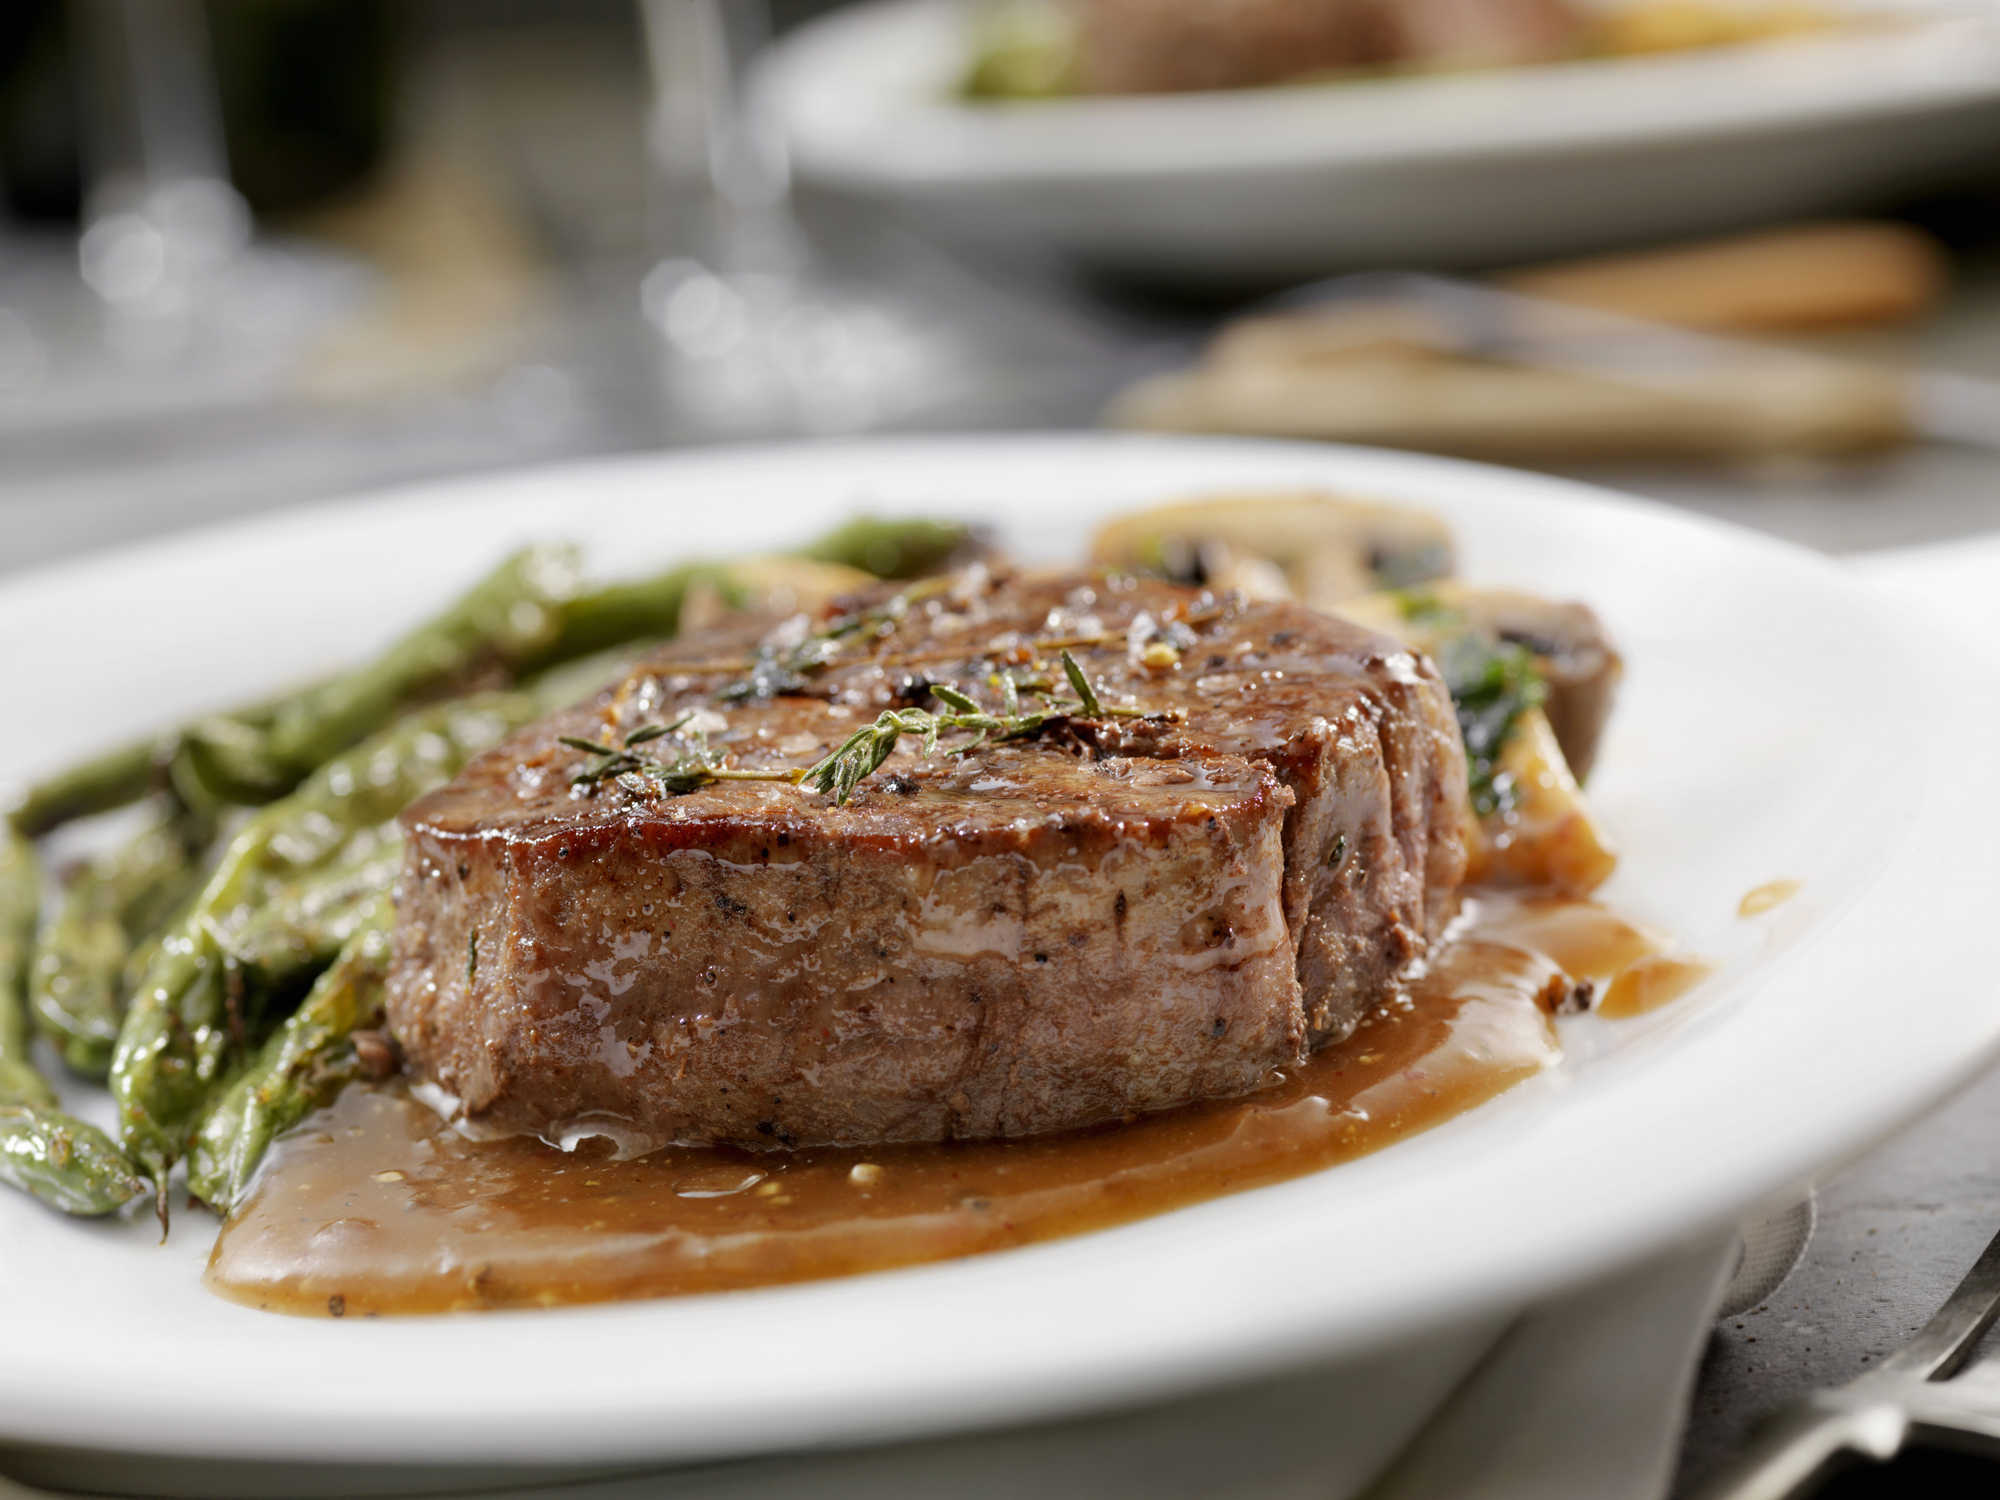 A grilled steak paired with asparagus on a plate, suggesting a family dinner idea